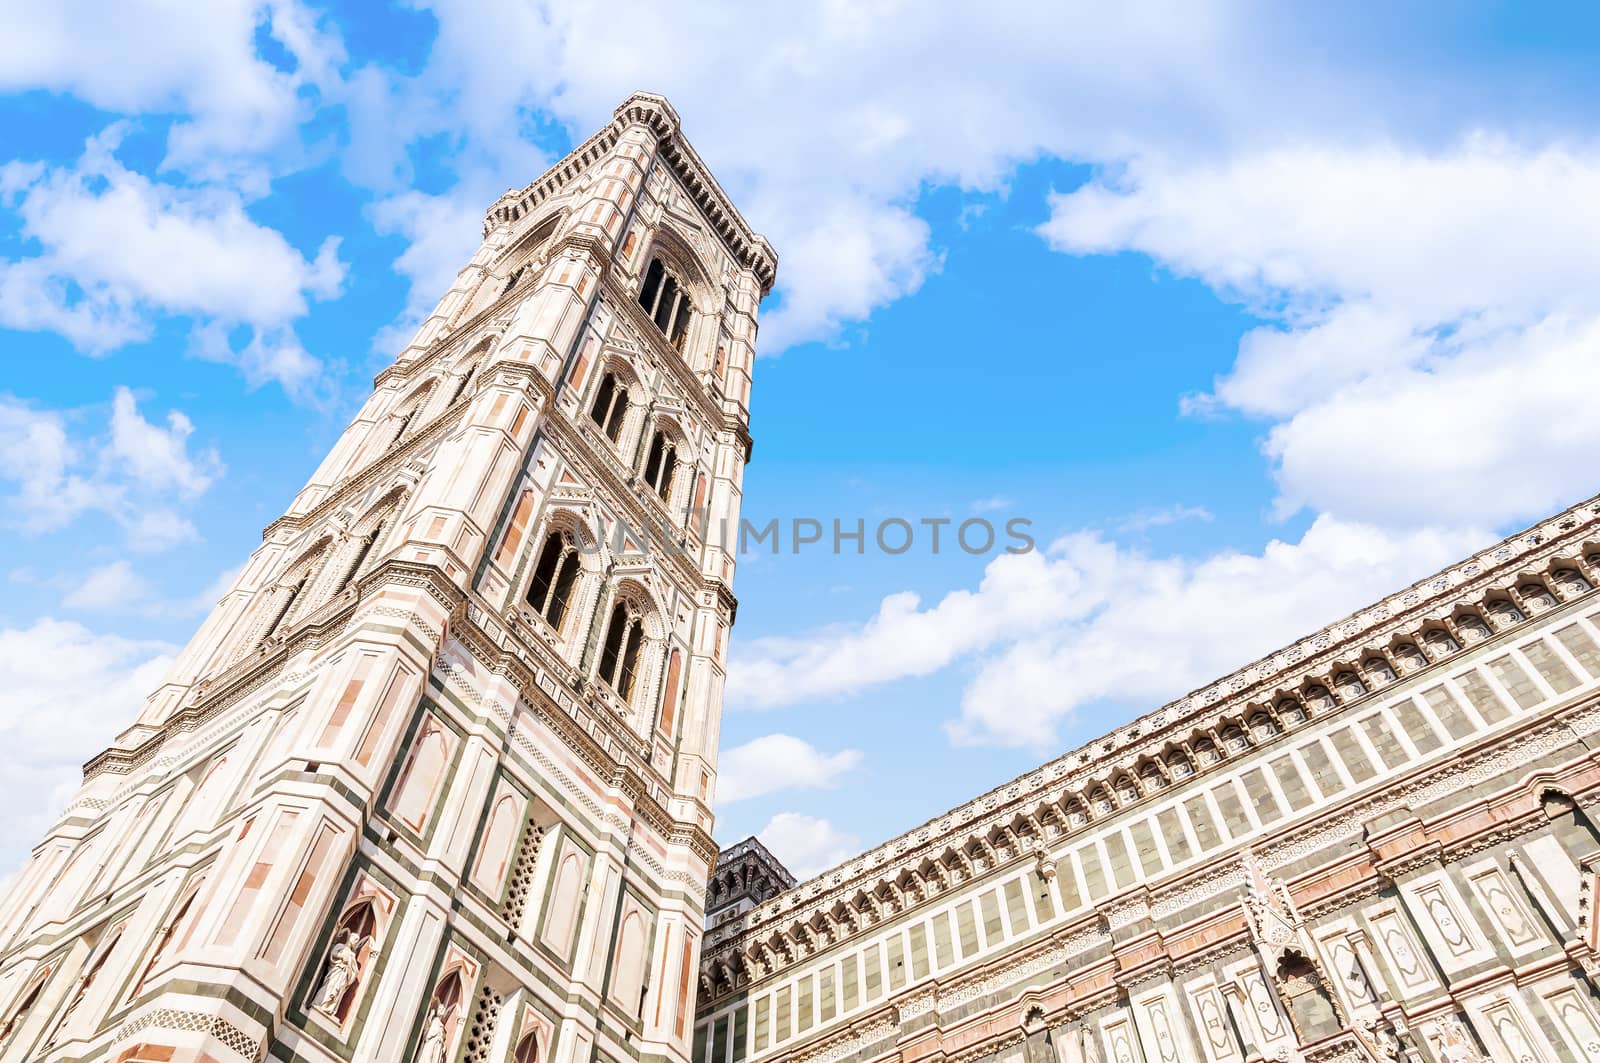 Campanile of the Cathedral of Santa Maria del Fiore in Florence in Tuscany, Italy by Frederic